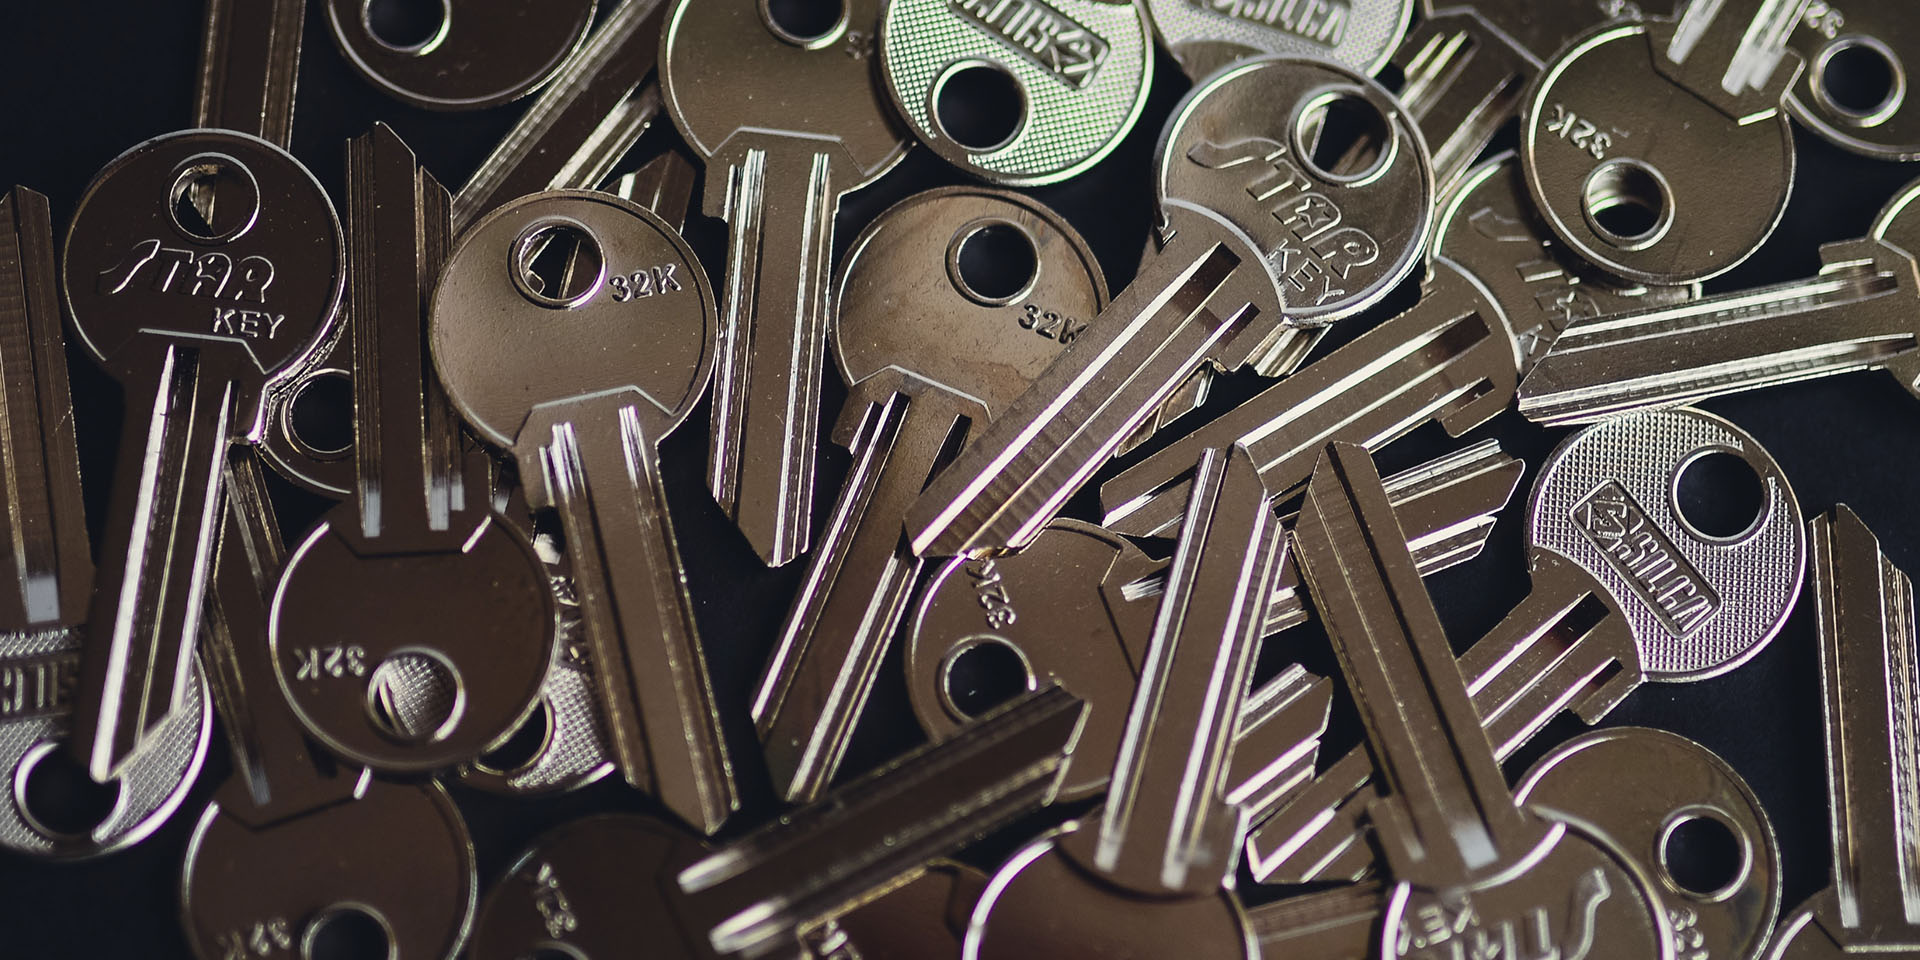 What should letting agents do when a key is lost?